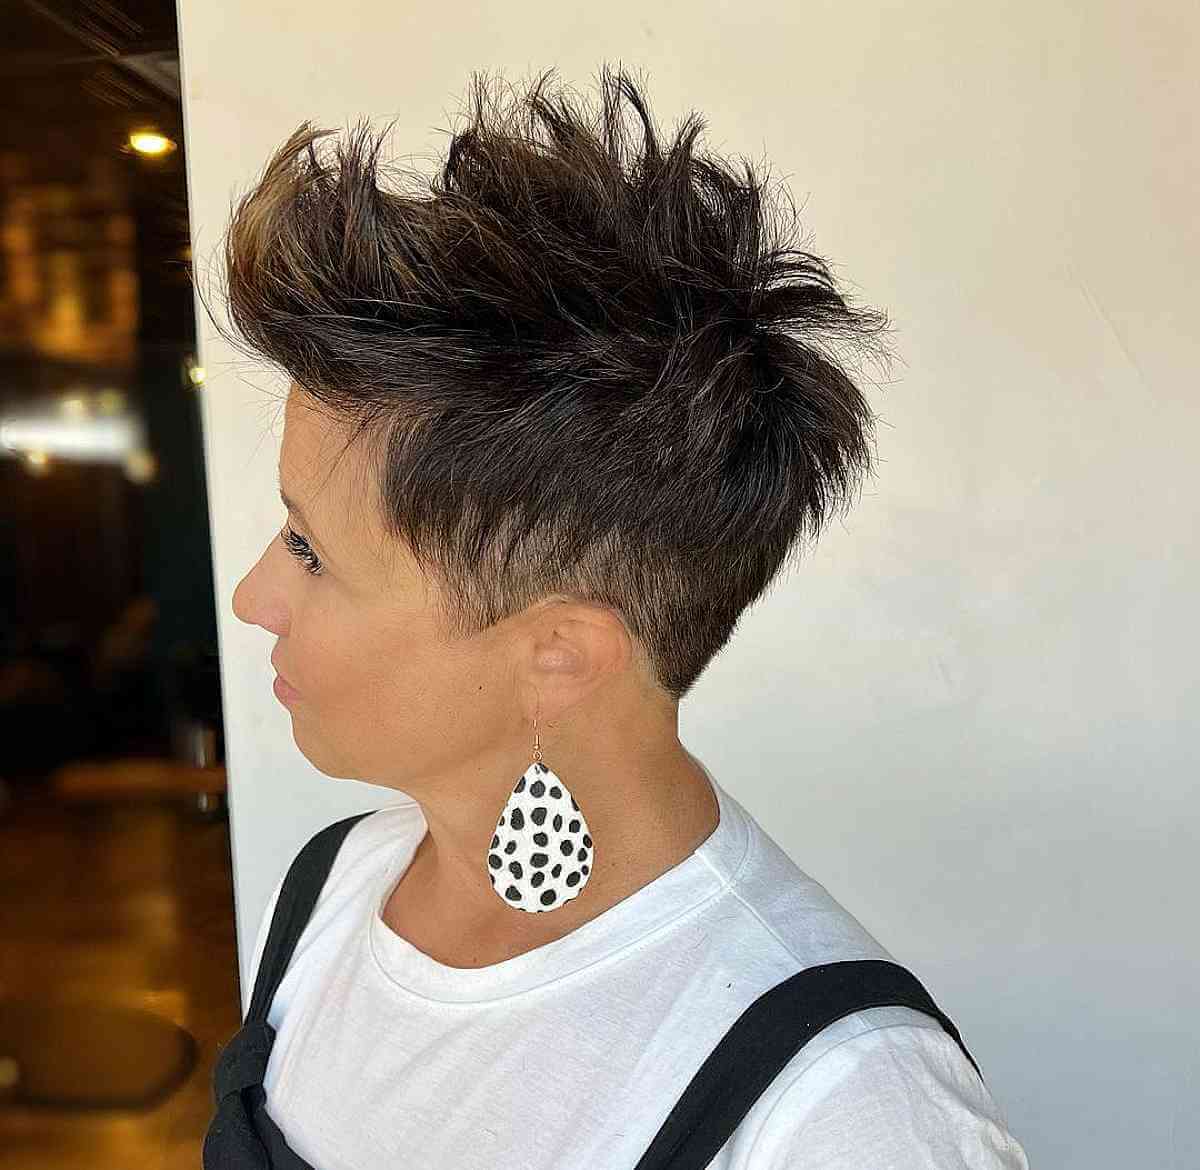 22 of the Boldest Short Spiky Hair Pictures and Ideas for 2023